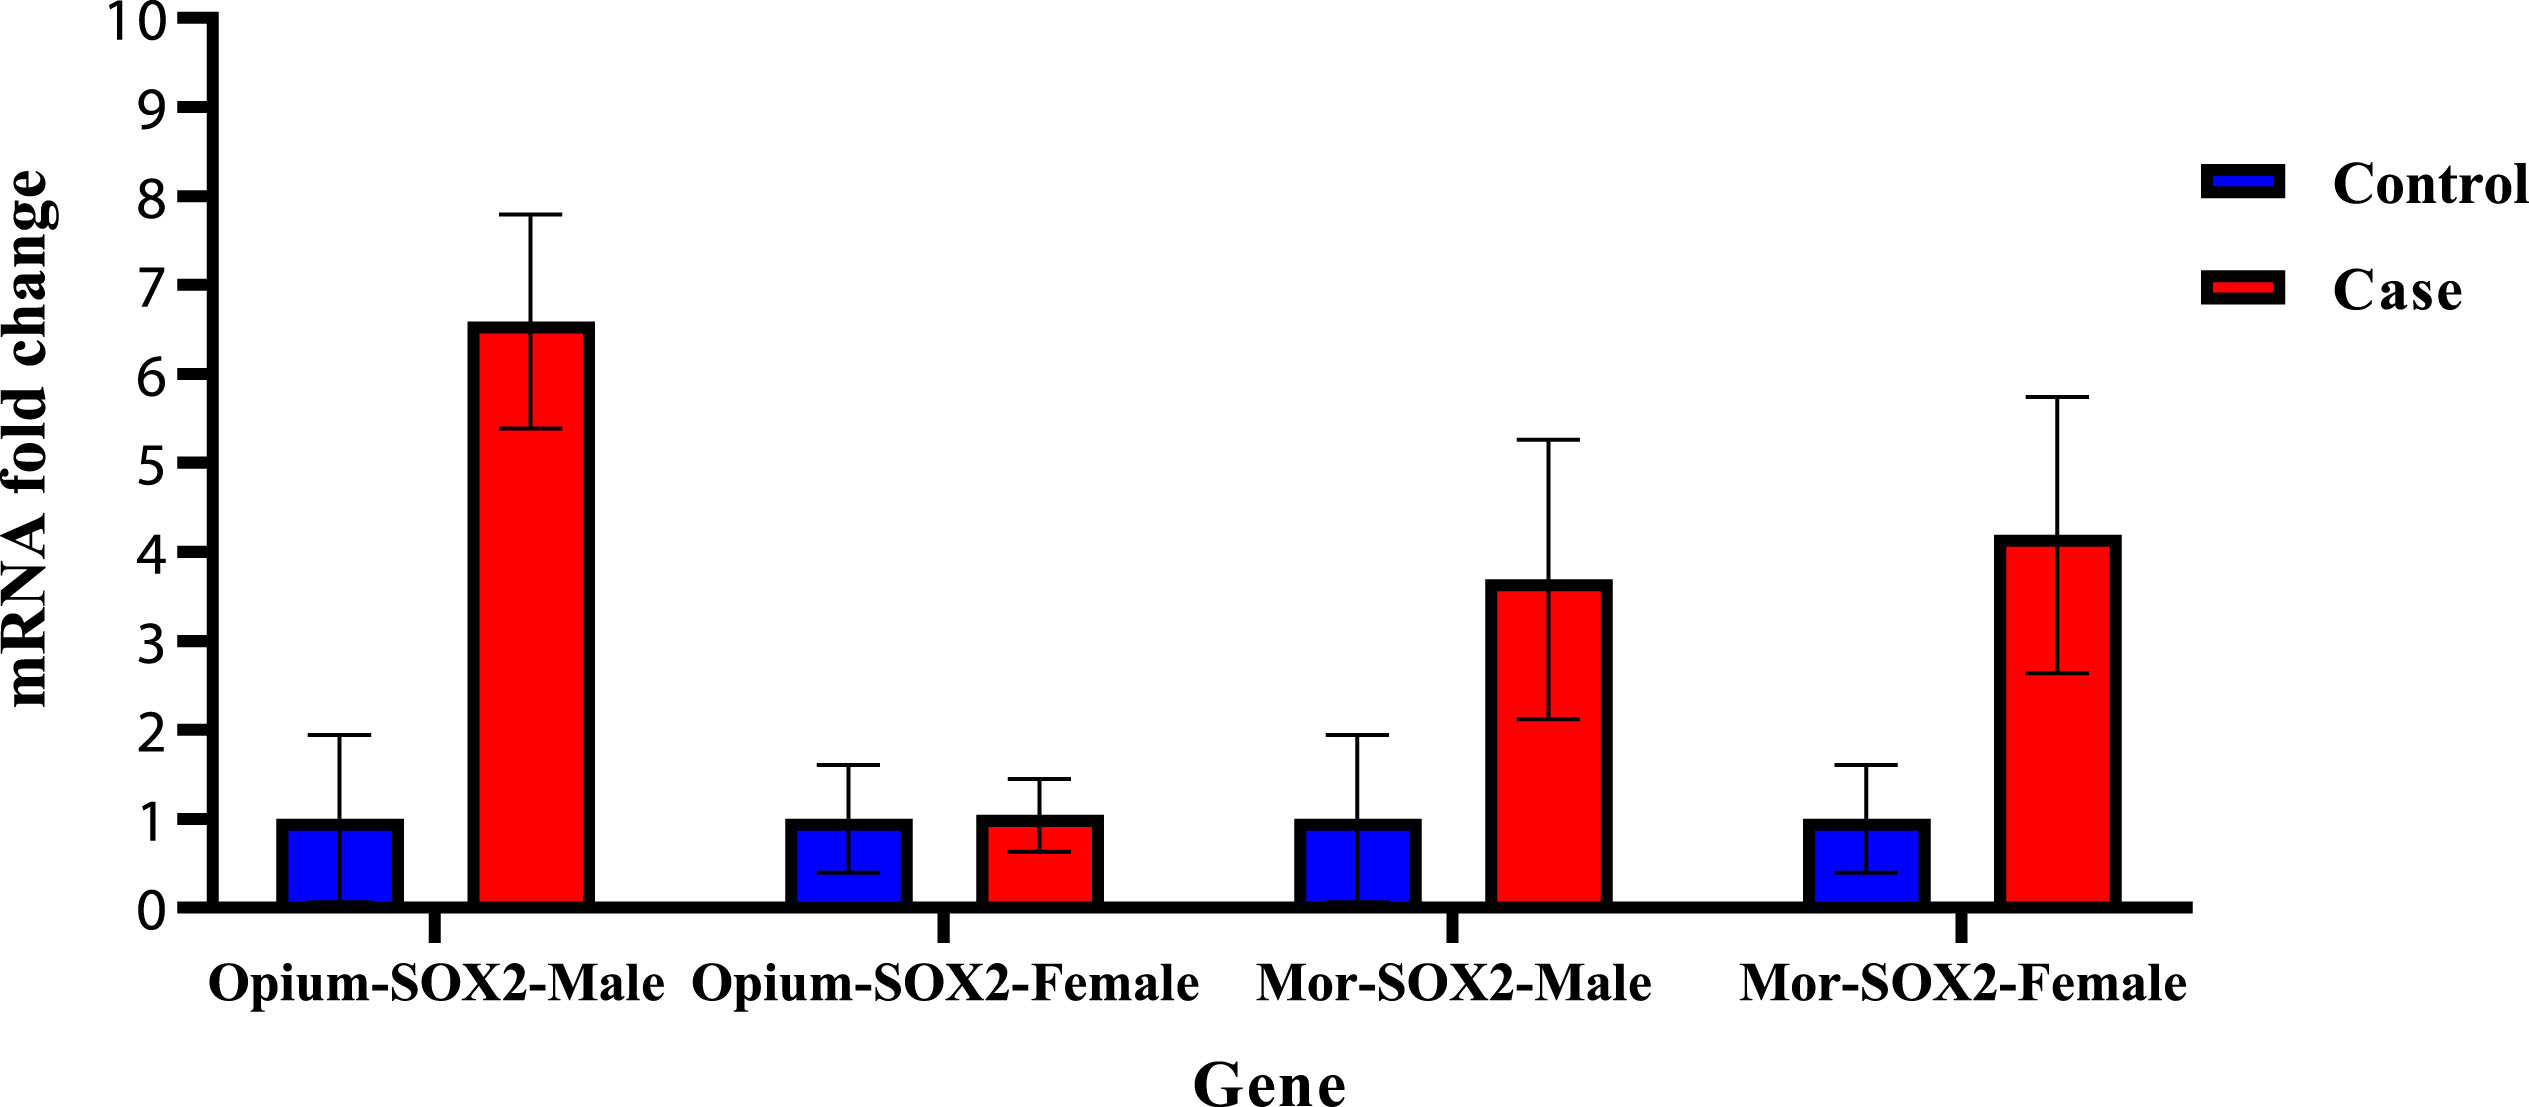 SOX2 mRNA fold change was increased in all groups except females in the opium group.